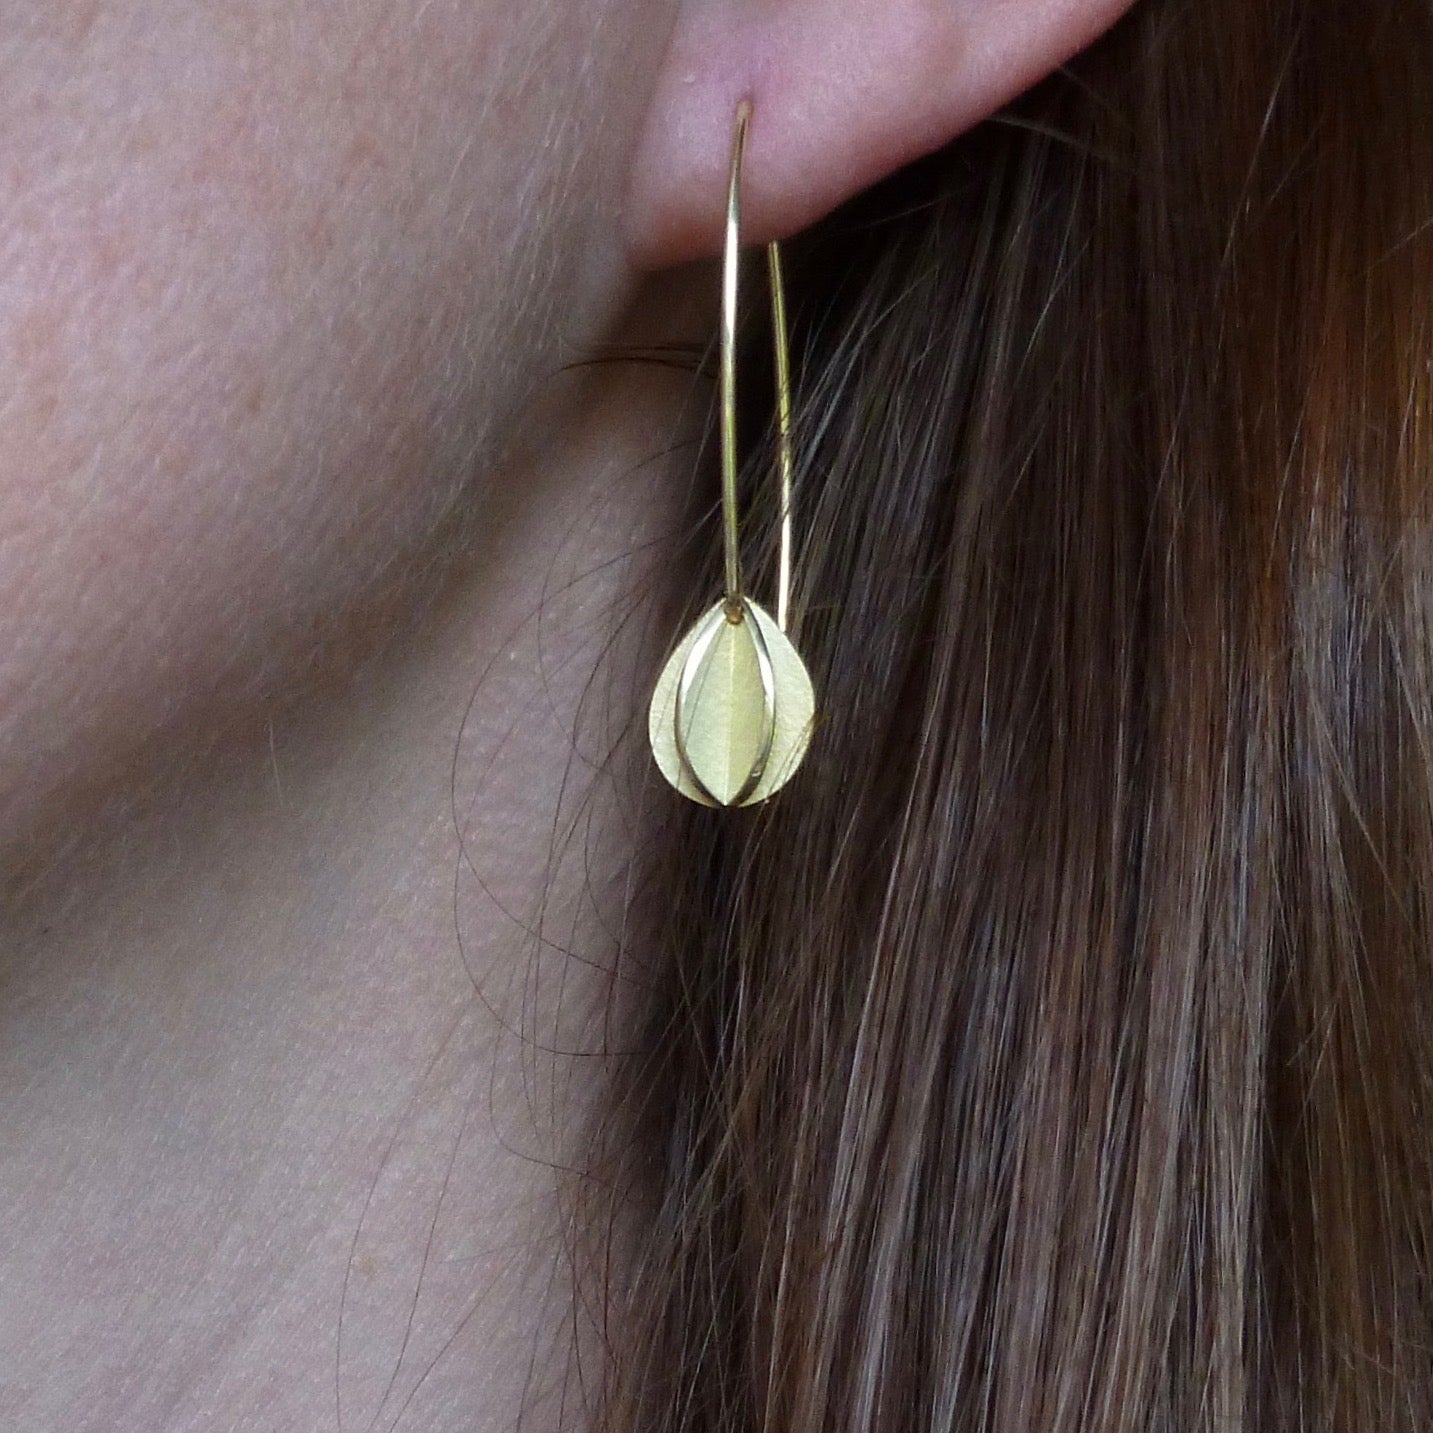 Contemporary modern bespoke leaf hook earrings in yellow gold handmade with a brushed finish